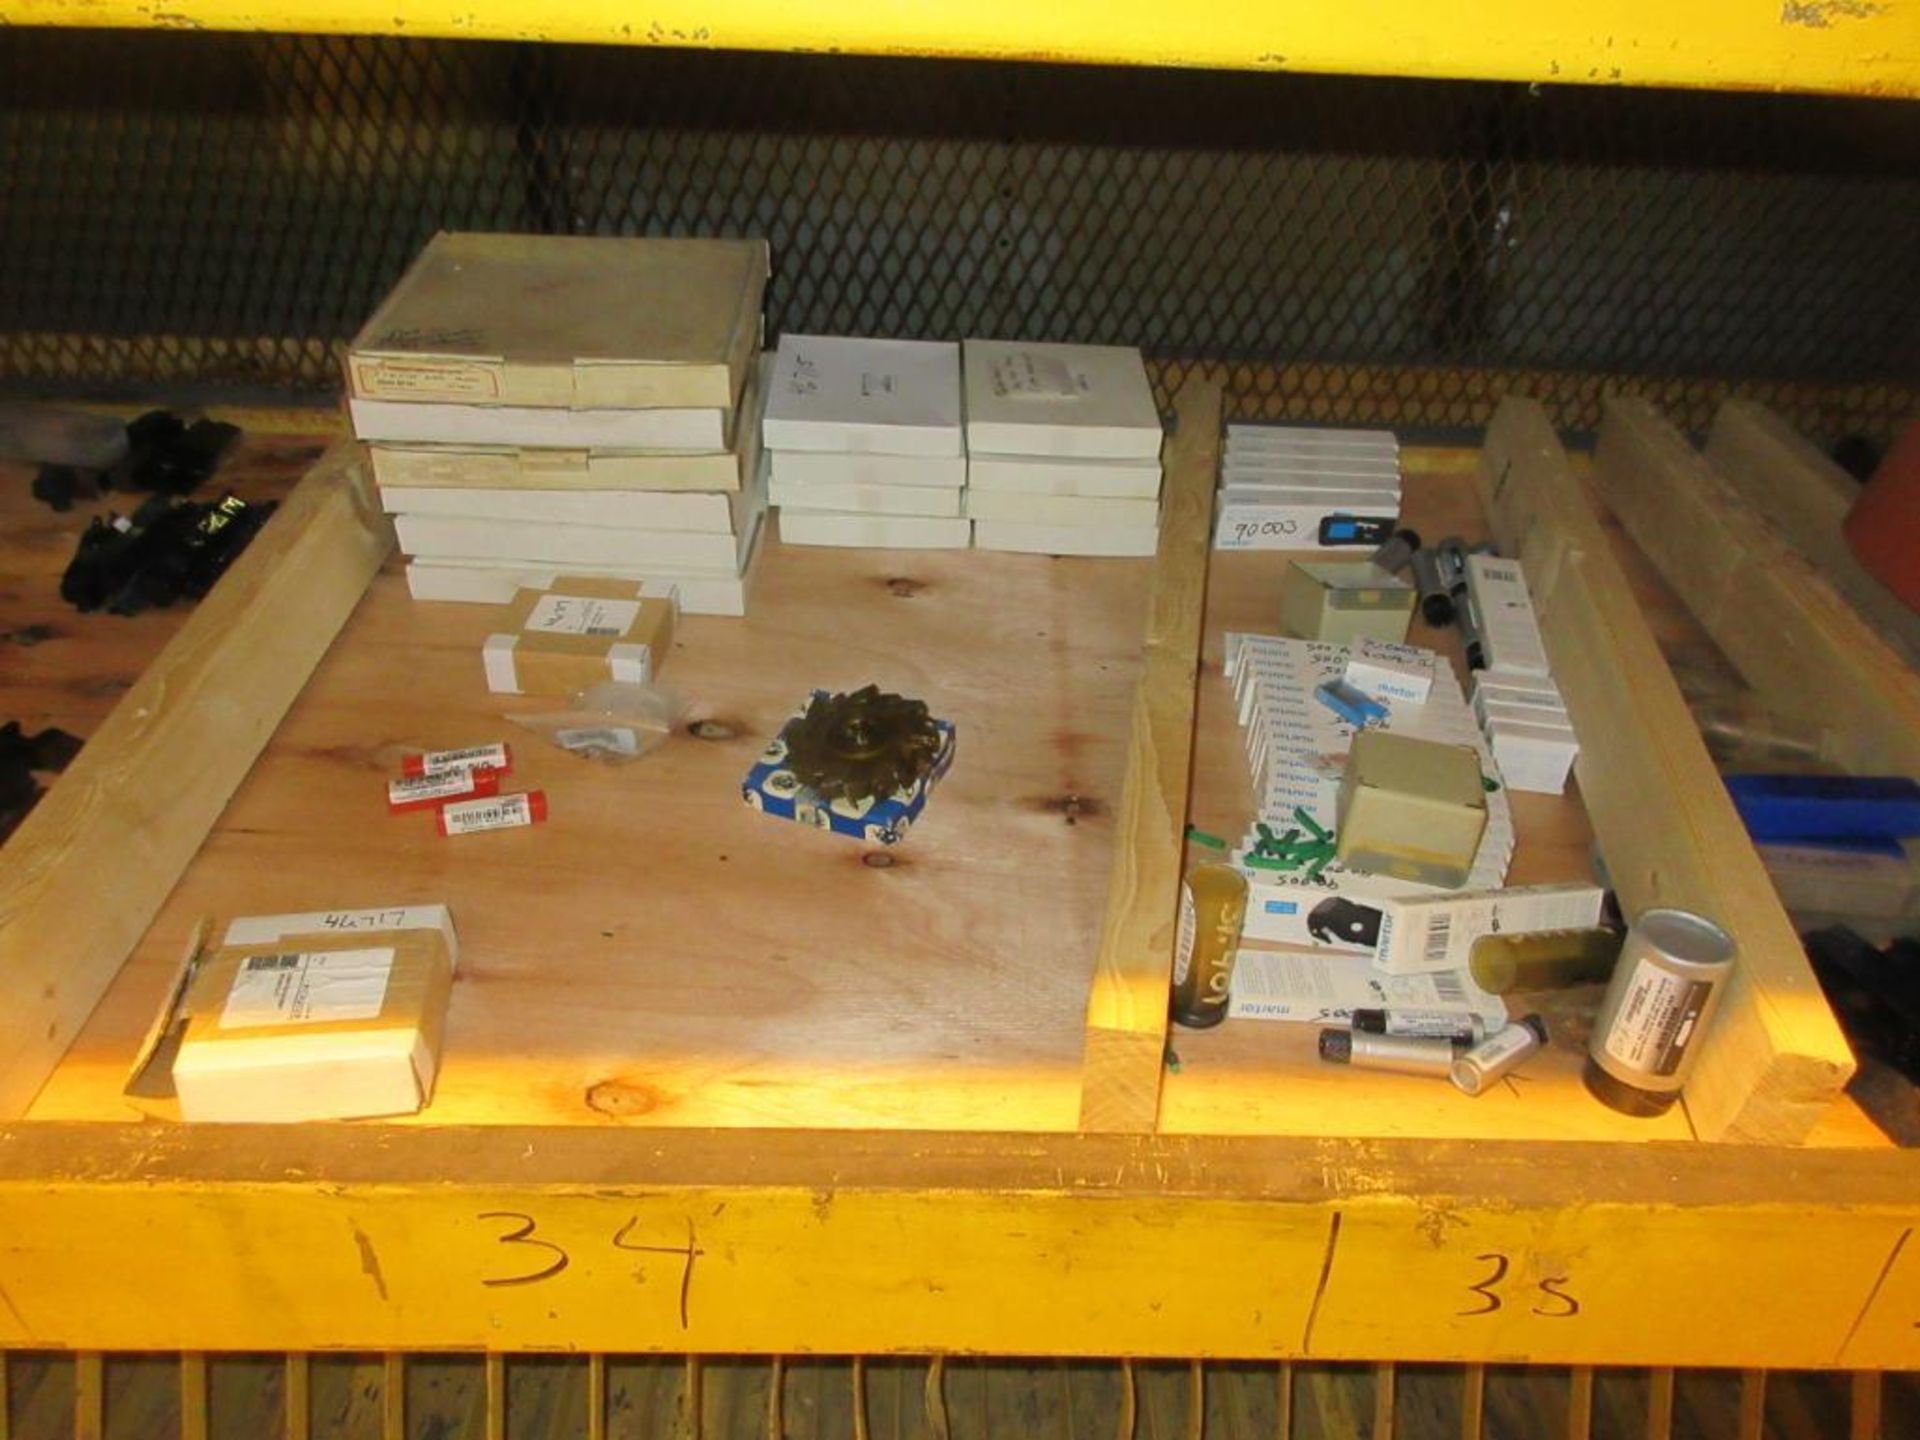 CONTENTS OF (22) SECTIONS PALLET RACK: ASSORTED ABRASIVES, SUNNEN STONES, TOOL BITS, DOVETAIL CUTTER - Image 9 of 43